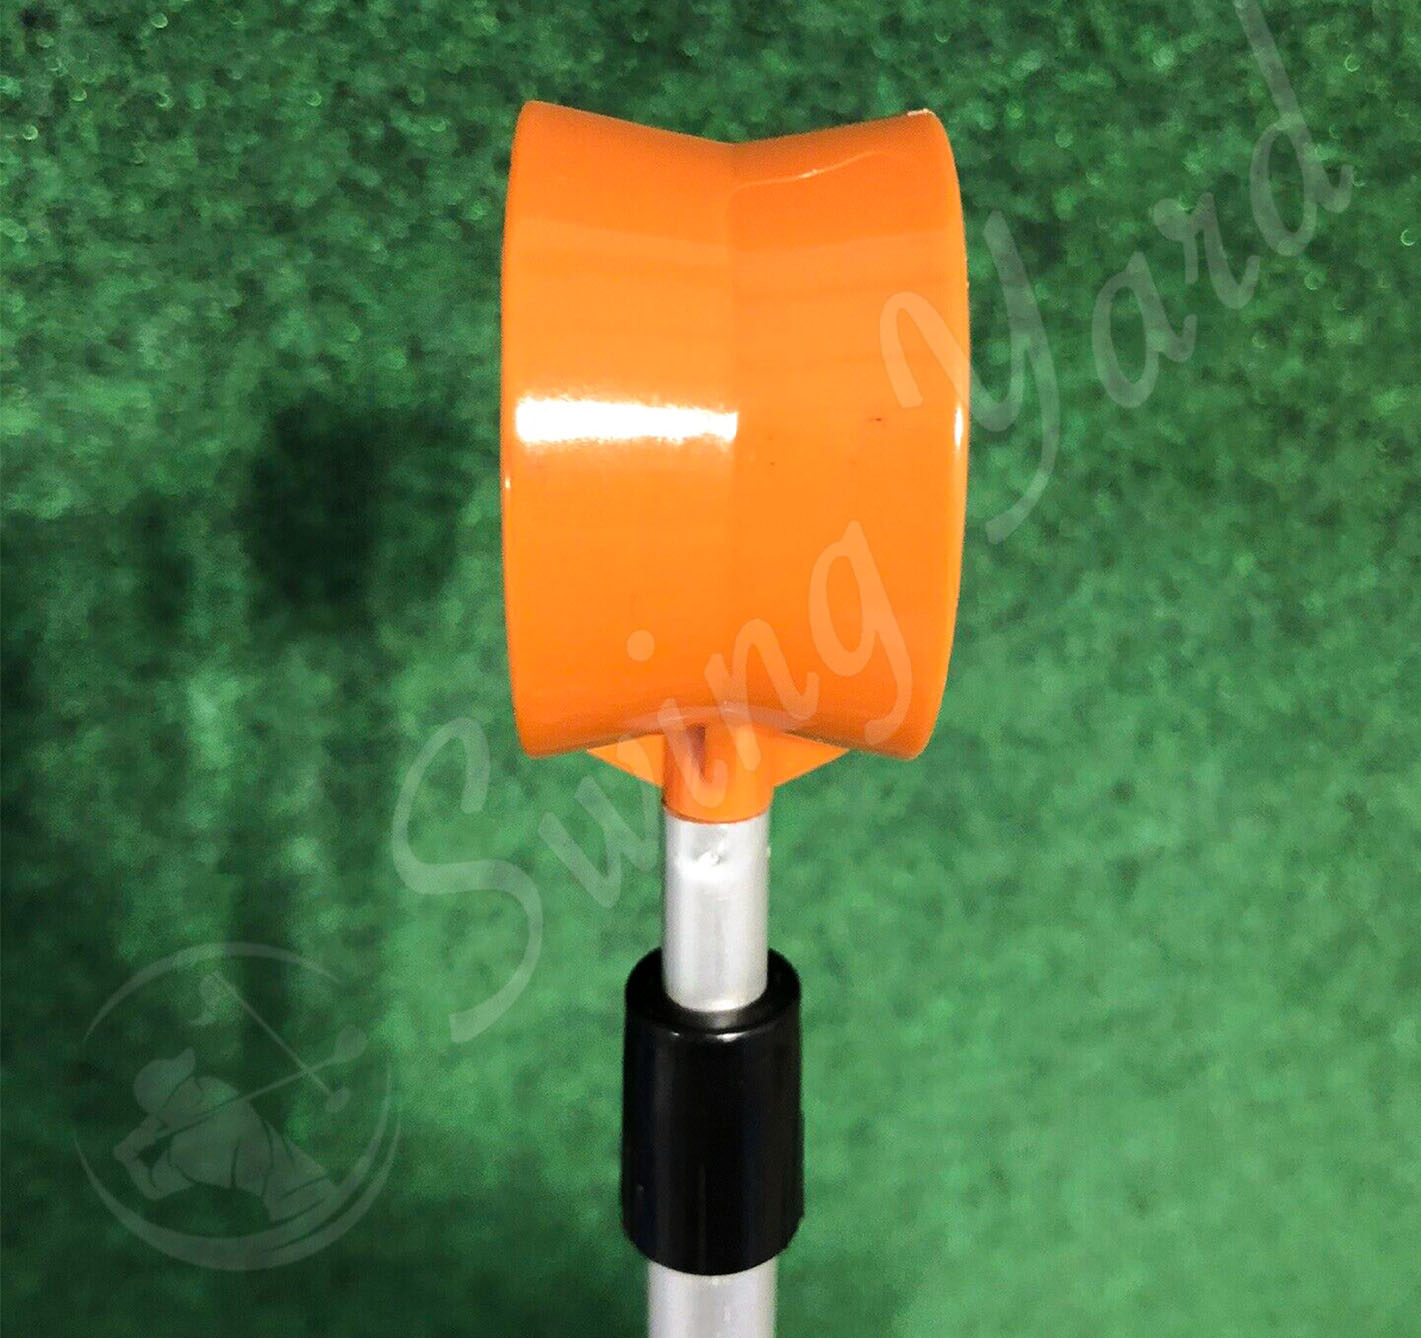 Showing a good quality ToVii Telescopic Golf Ball Retriever at the golf course